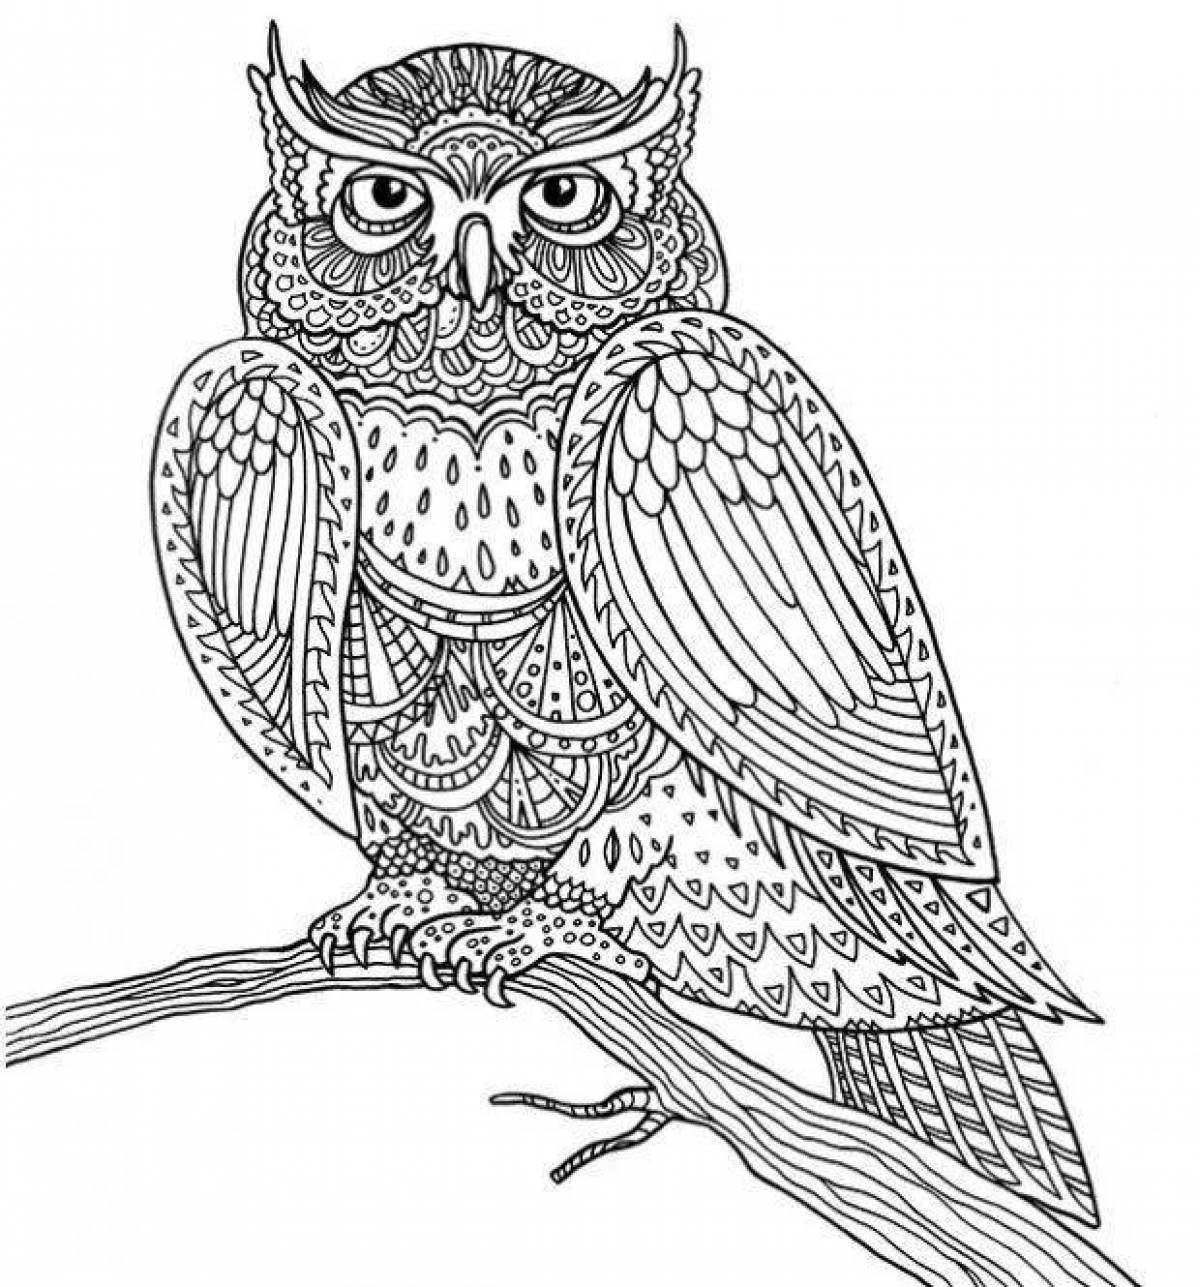 Adorable owl coloring pages